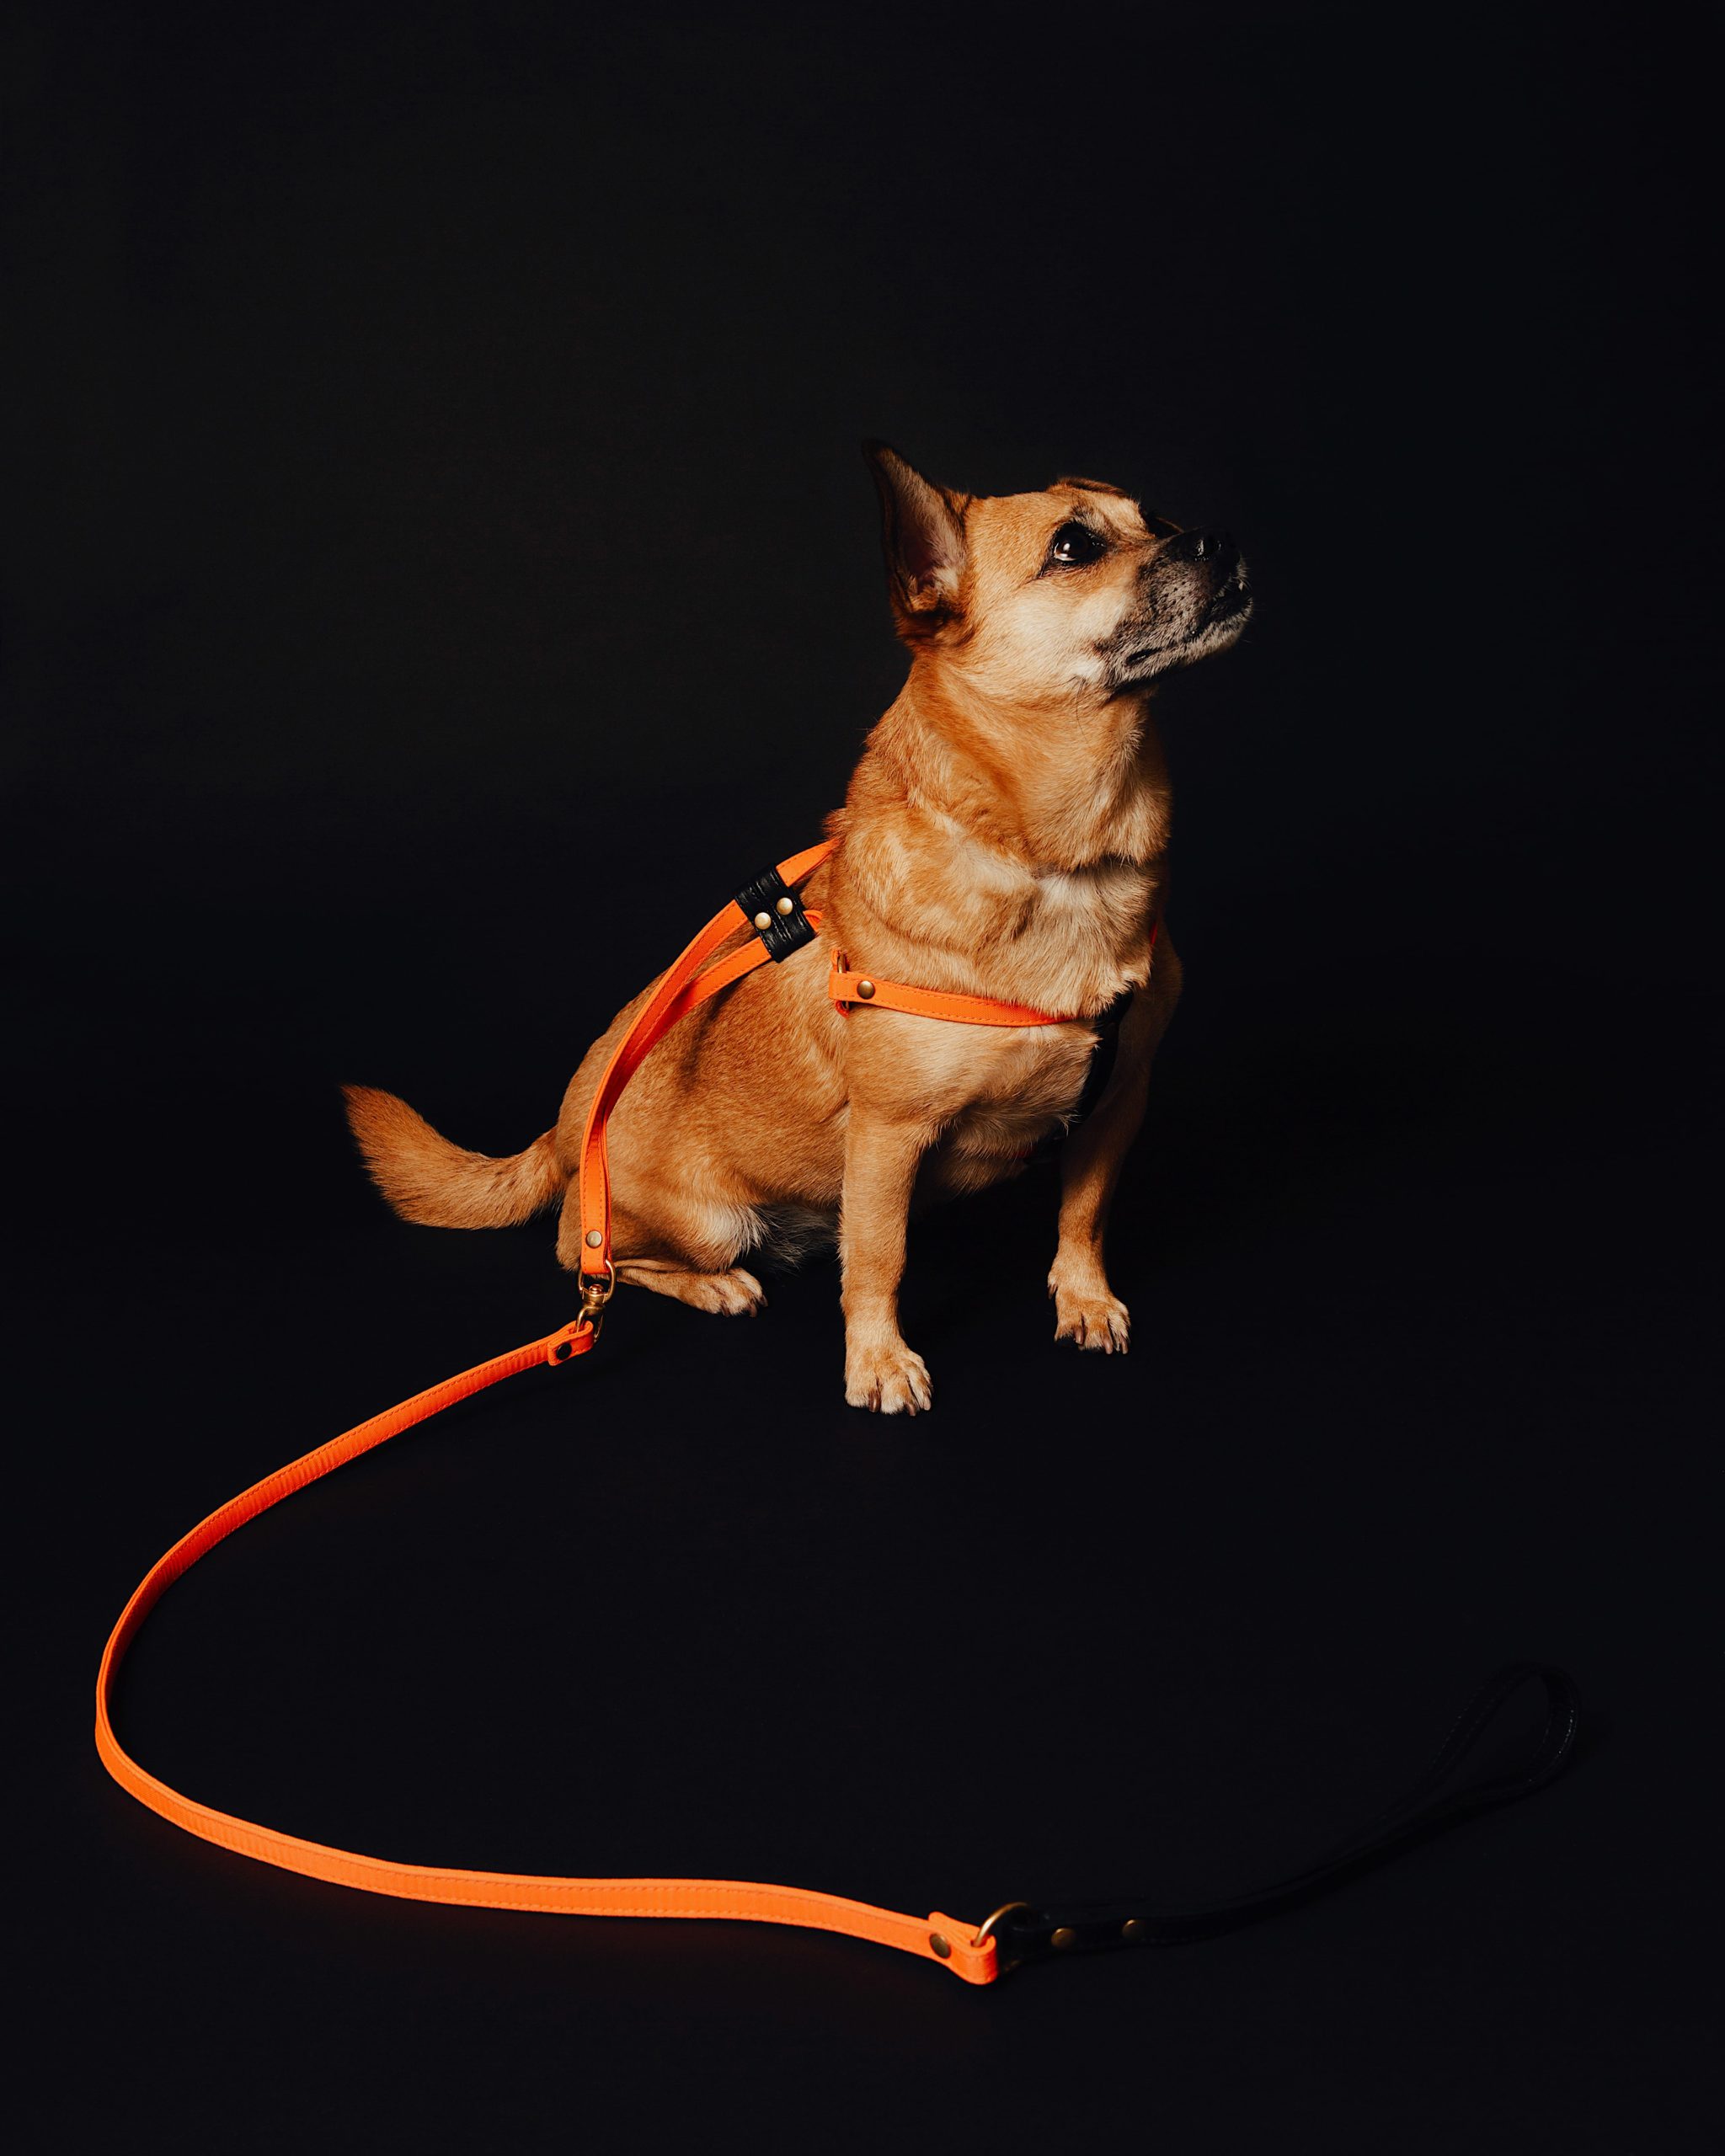 Mr. Dog New York harness and leash for Argos & Artemis, photographed by Tayler Smith.